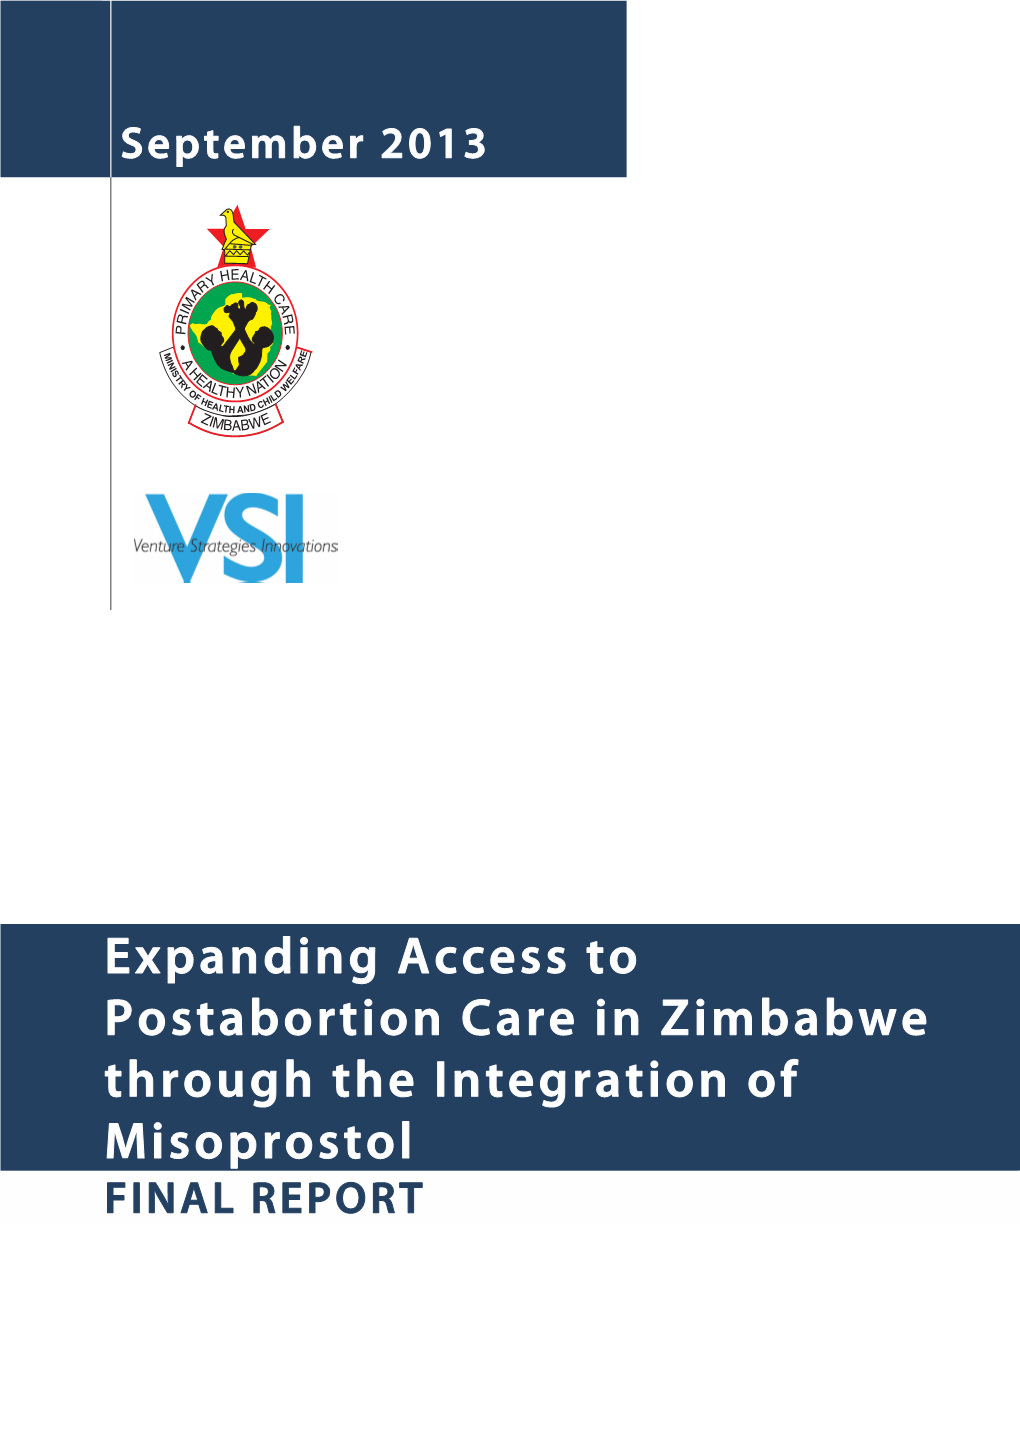 Expanding Access to Postabortion Care in Zimbabwe Through the Integration Of